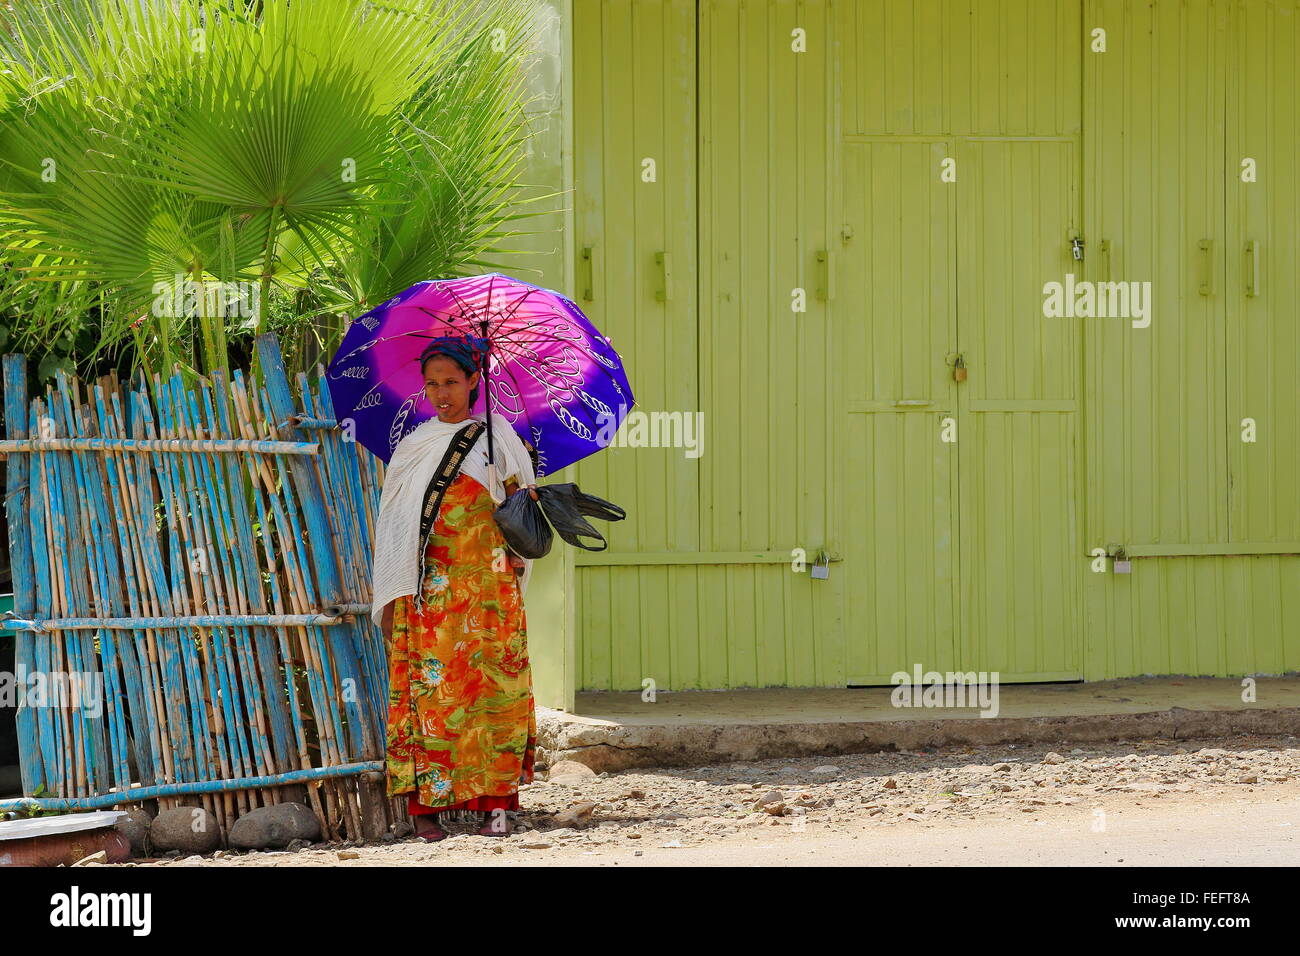 DEBRE BIRHAN-ETHIOPIA-MARCH 24: Local young woman with umbrella waits for the bus to come while standing on the main street. Stock Photo